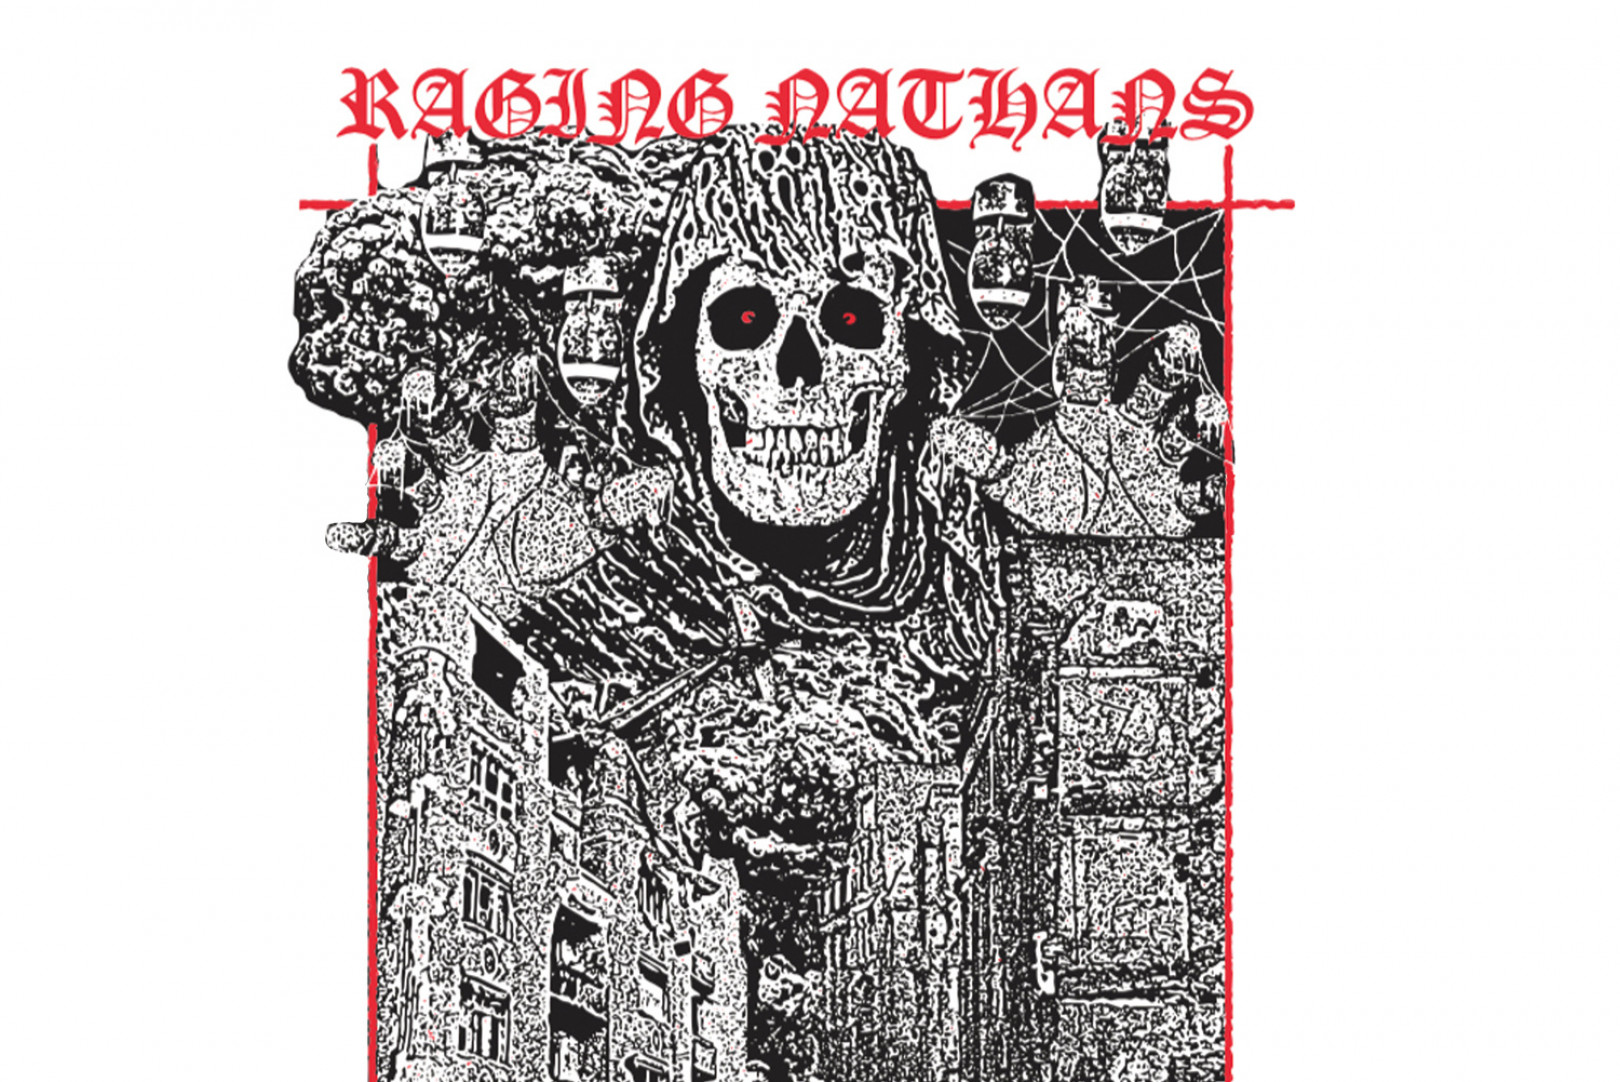 Raging Nathans detail new album,  release new track